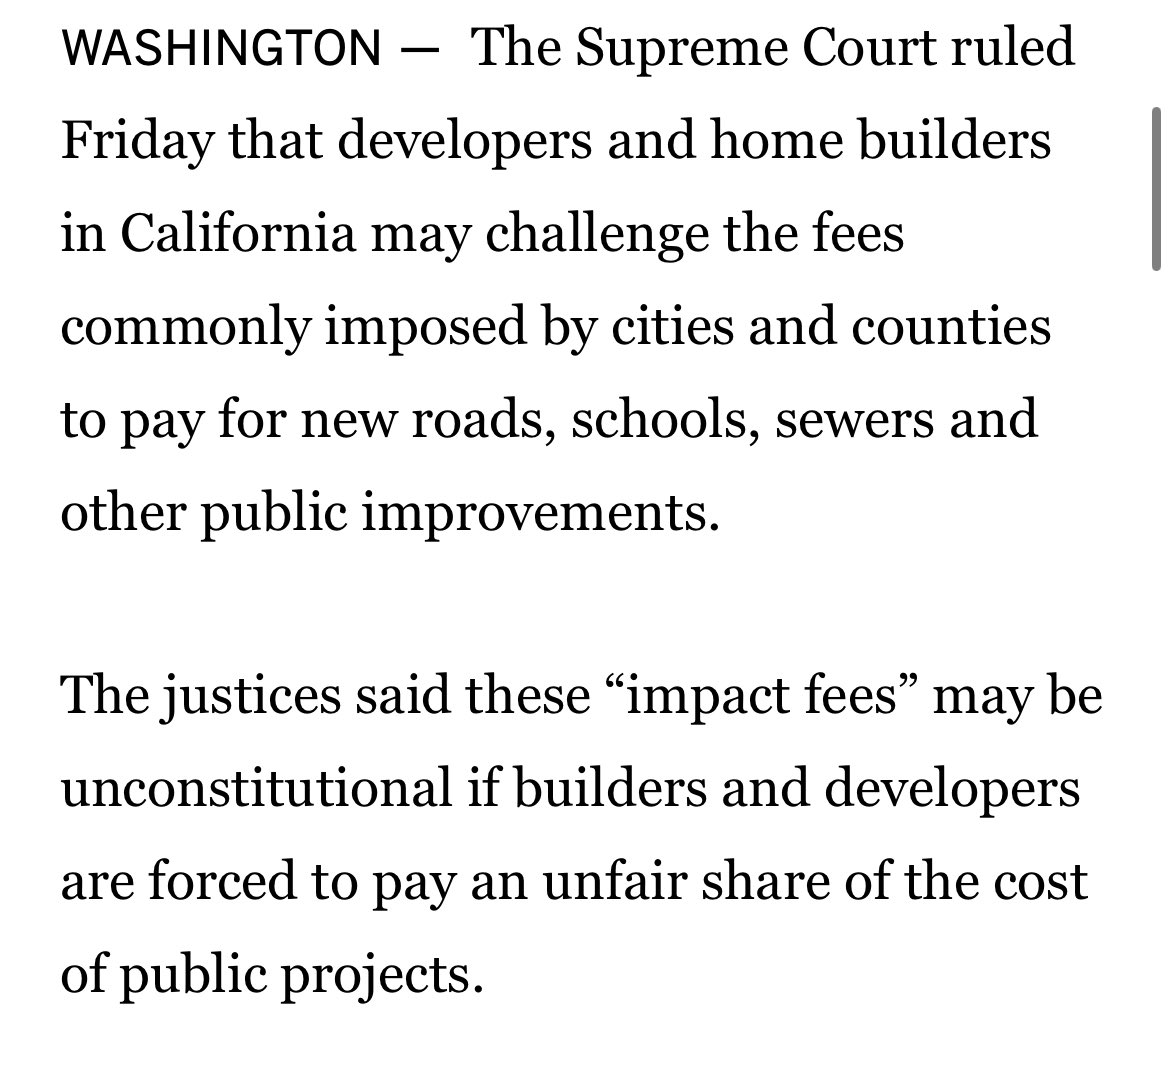 Homebuilders and developers may challenge California’s development ‘impact fees,’ Supreme Court rules 9-0 U.S. Supreme Court decision latimes.com/politics/story…